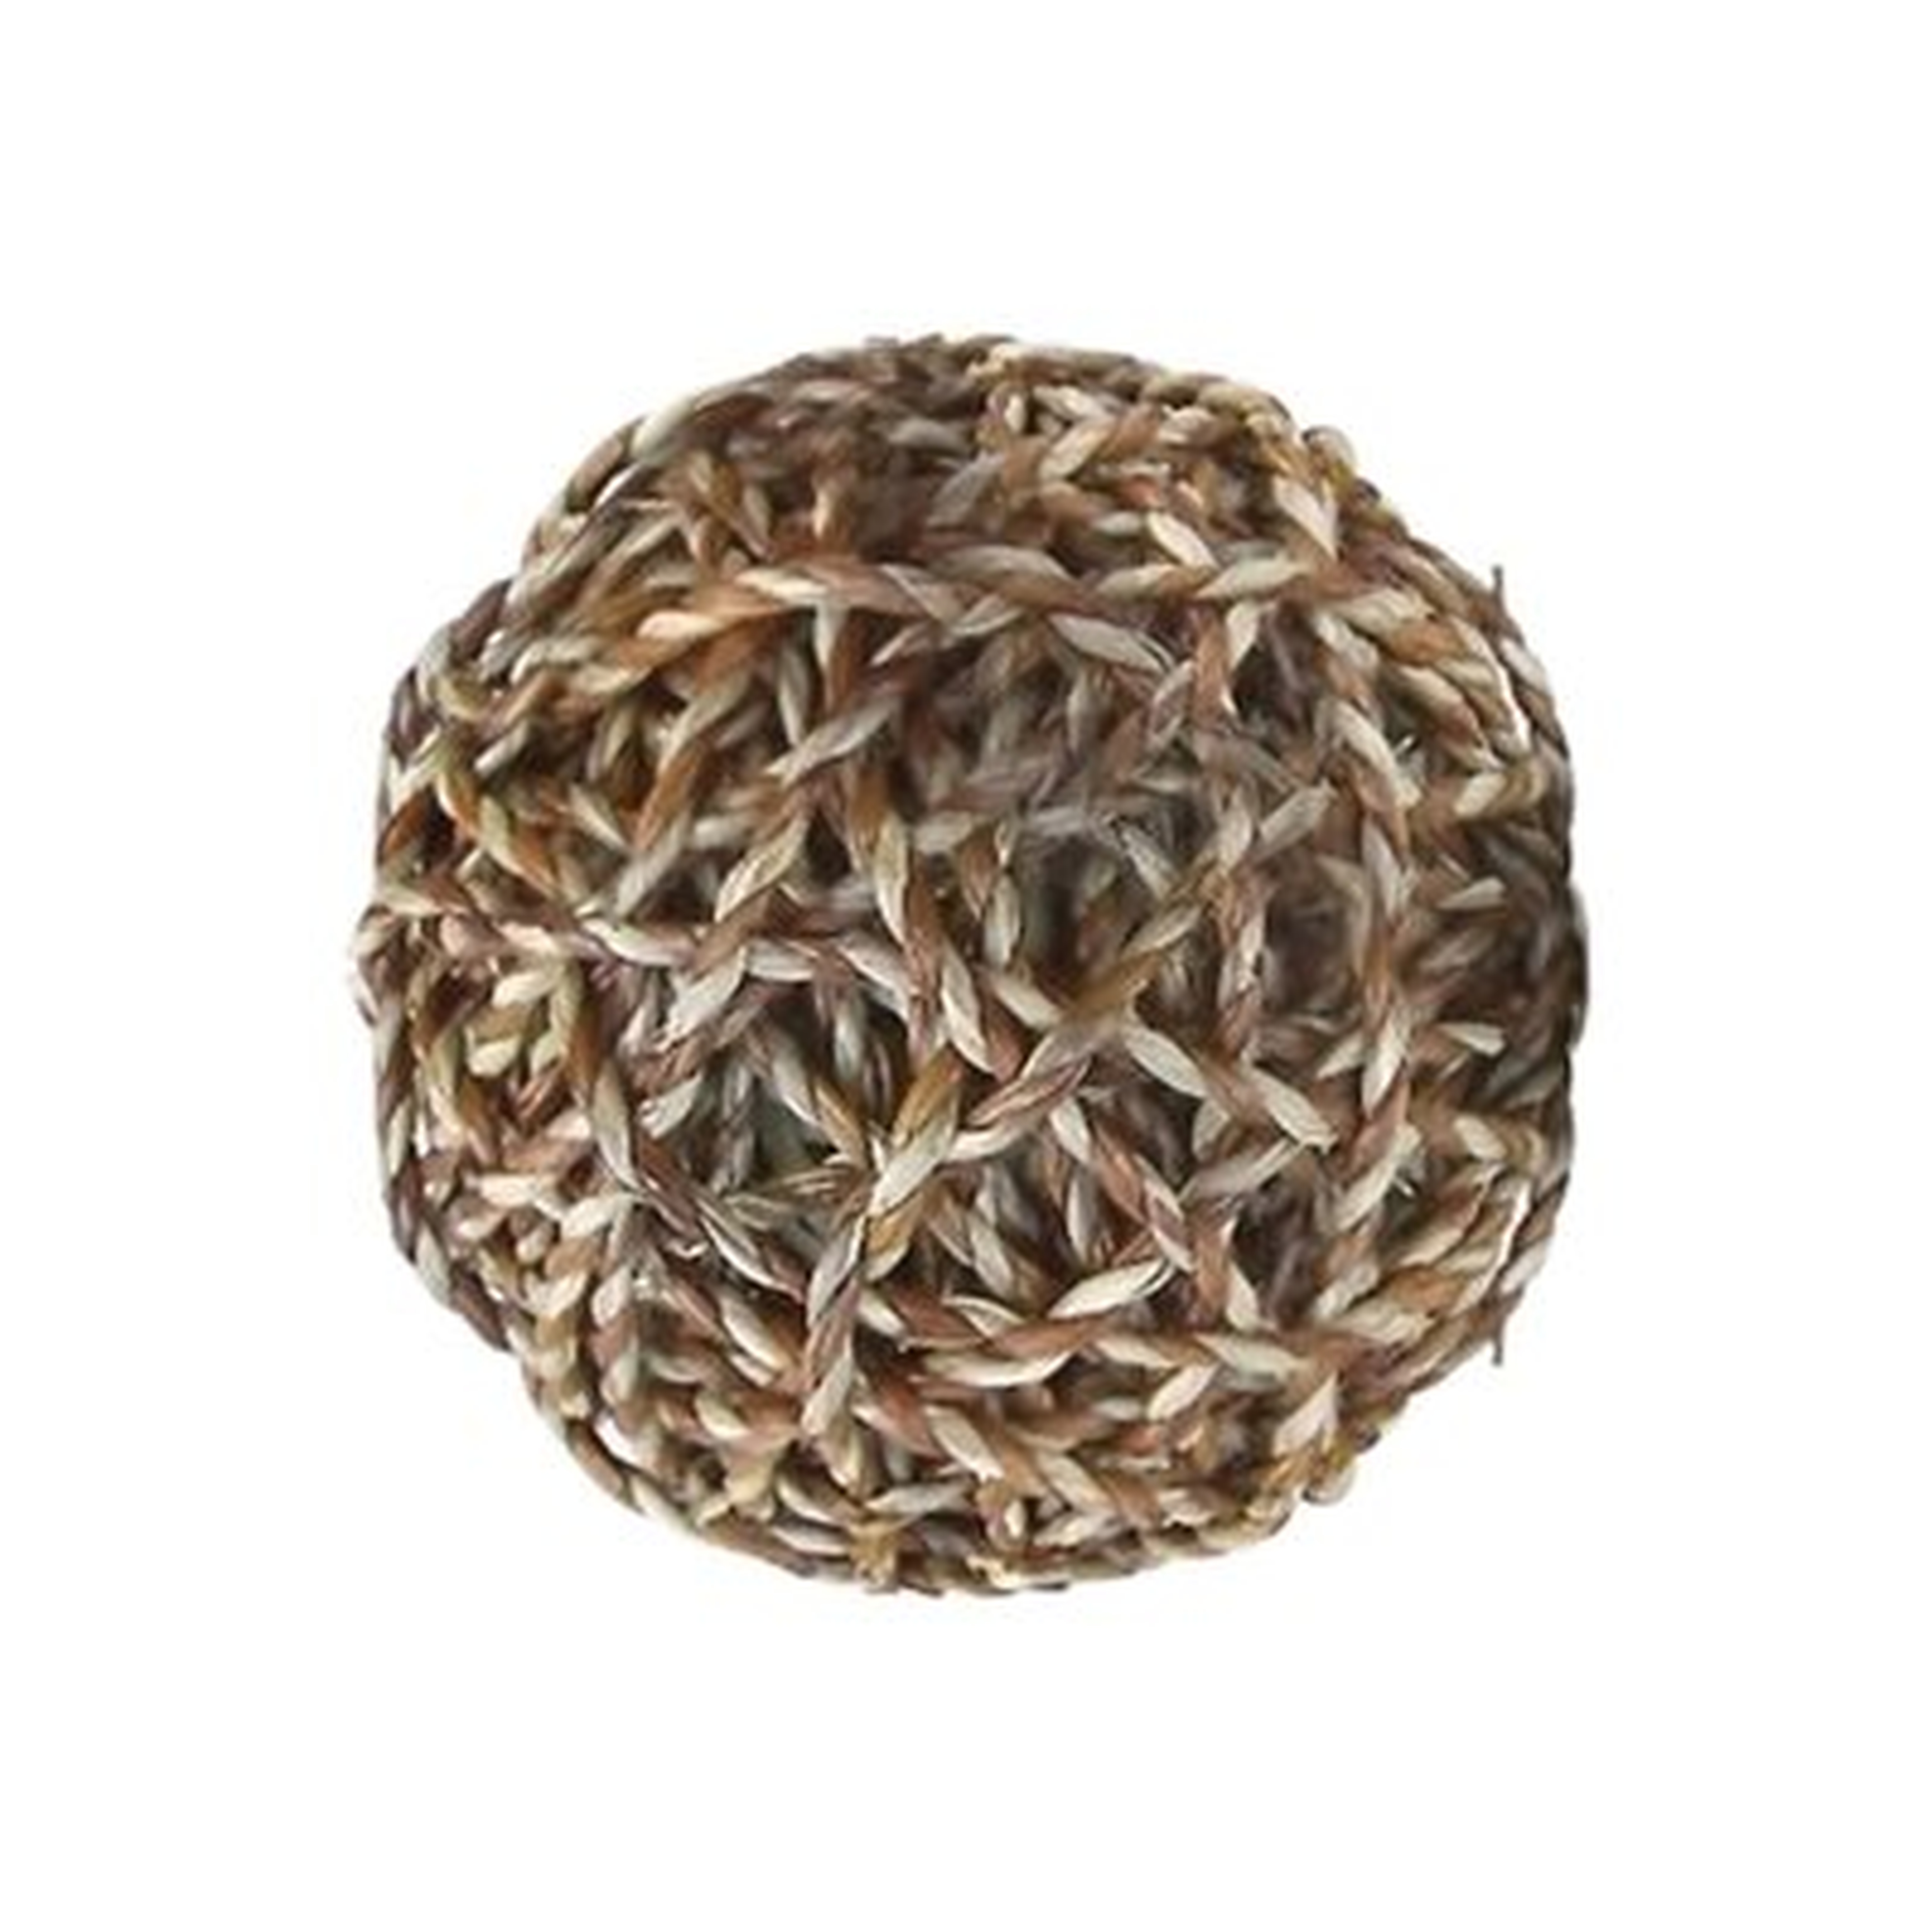 These Natural Fiber, Intricately Woven Rope 6" Decorative Ball - Wayfair